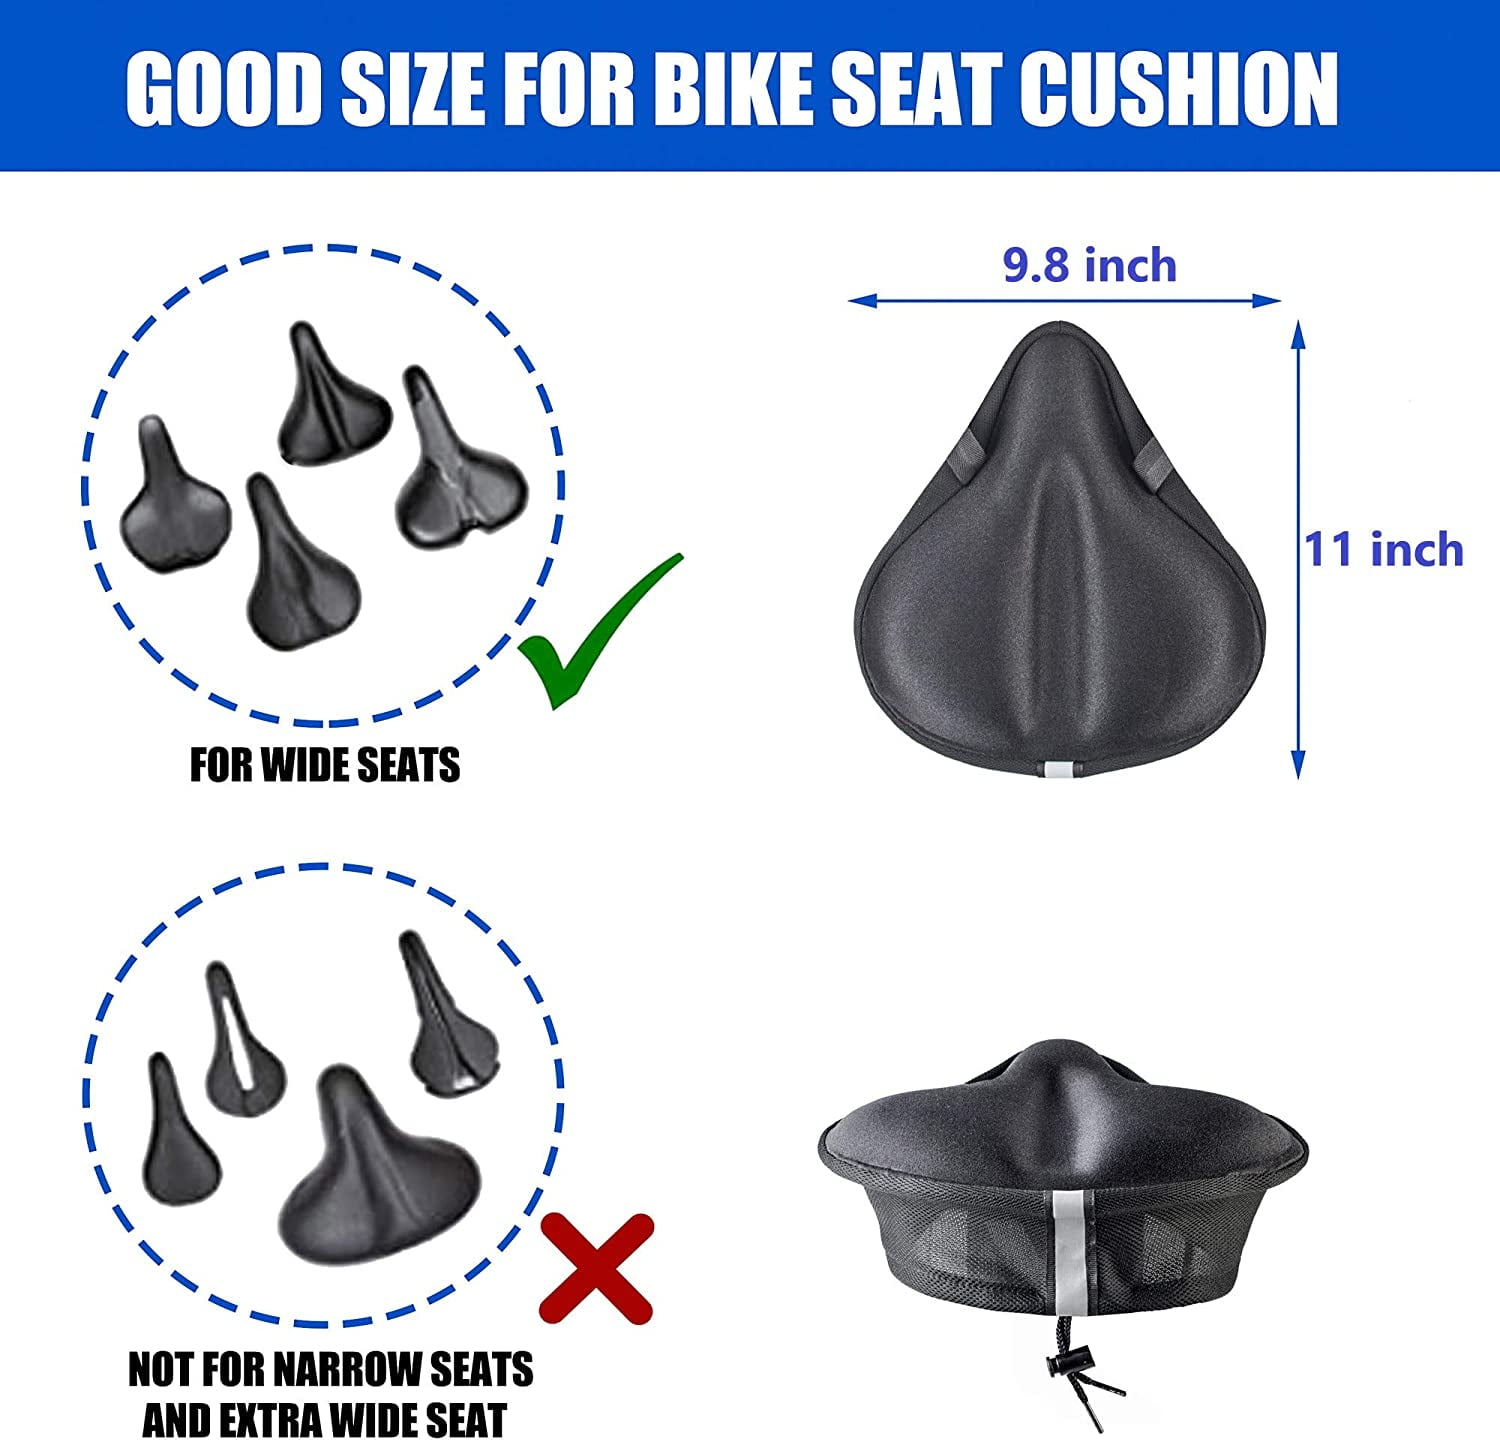 The Most Comfortable Bike Seats for Every Type of Rider  Coccyx cushion,  Car seat cushion, Memory foam seat cushion